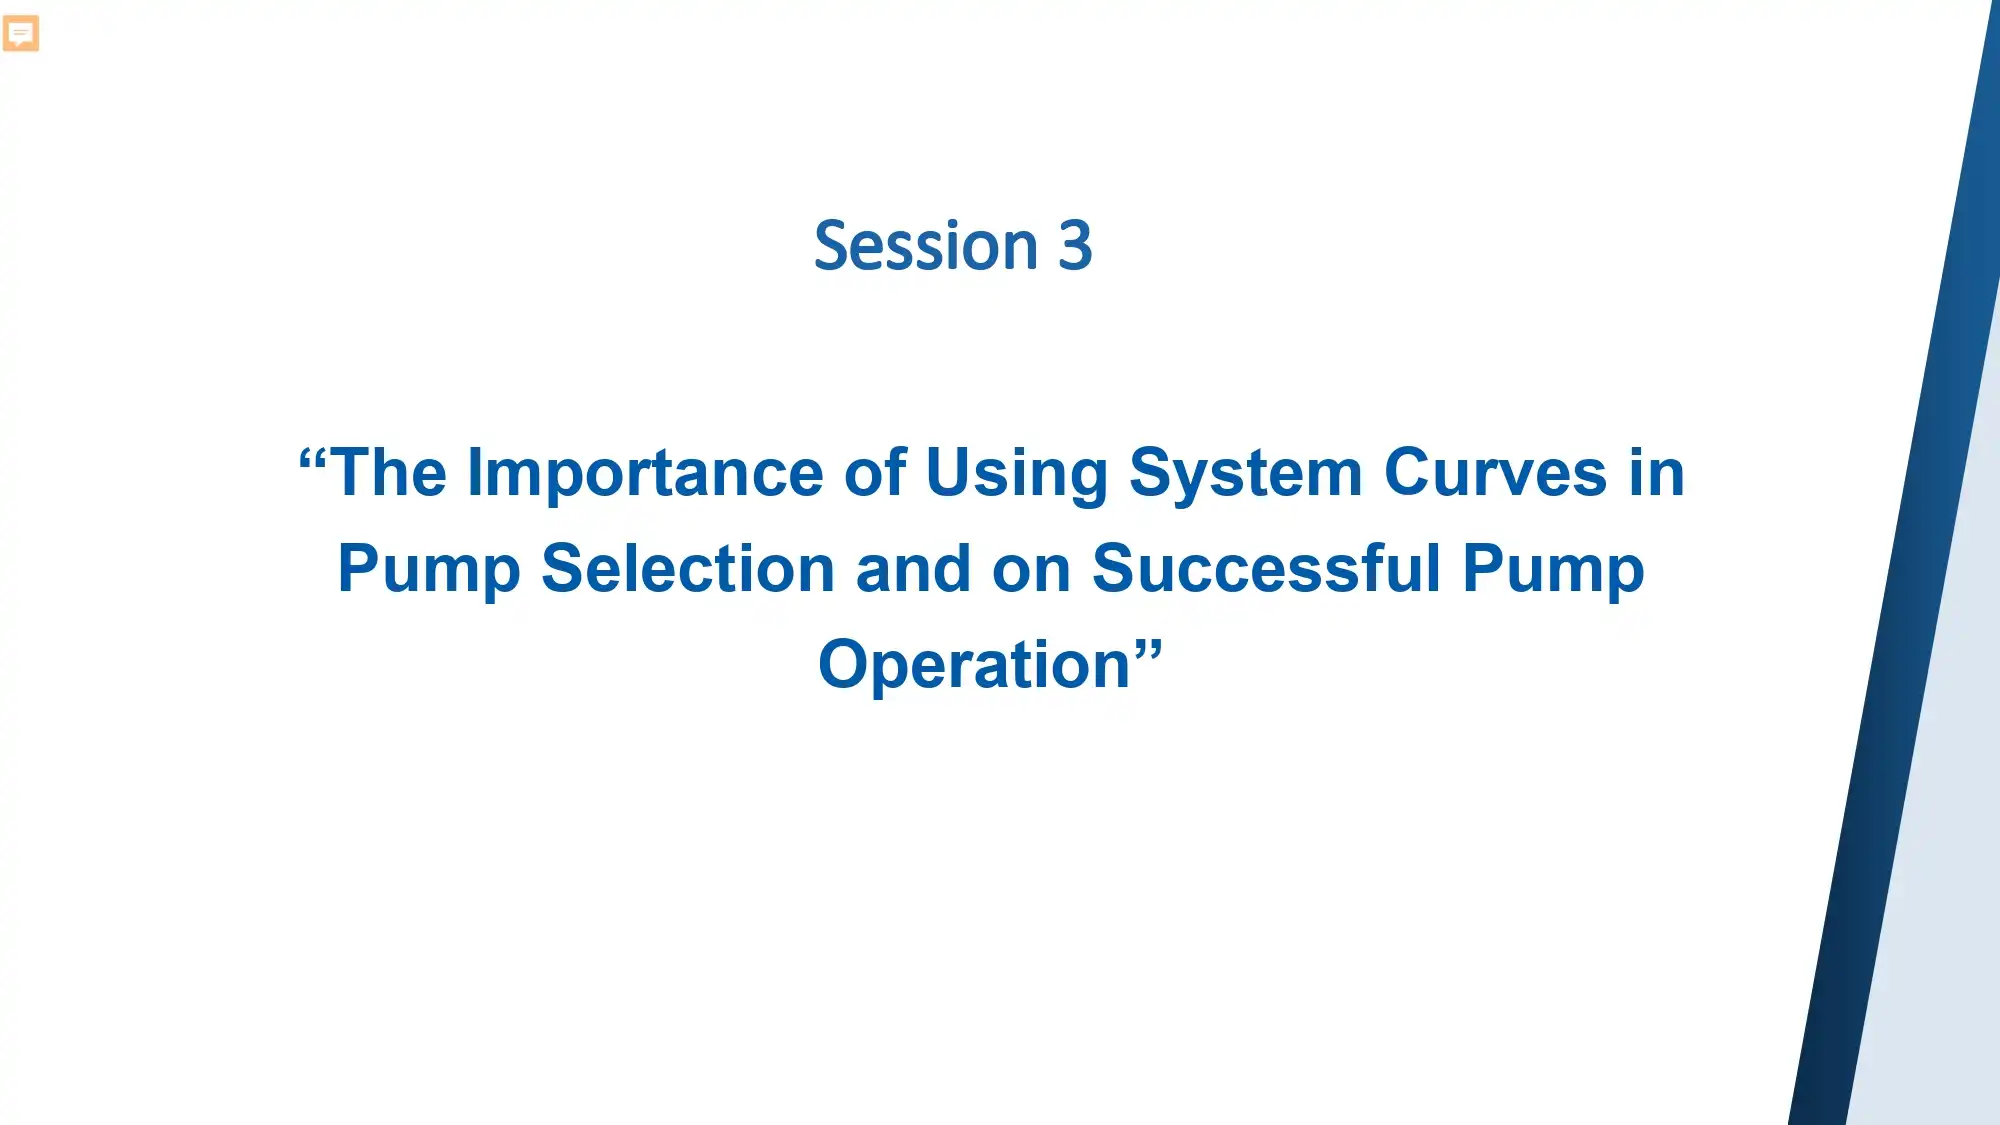 Session 3 The Importance of Using System Curves in Pump Selection and on Successful Pump Operation